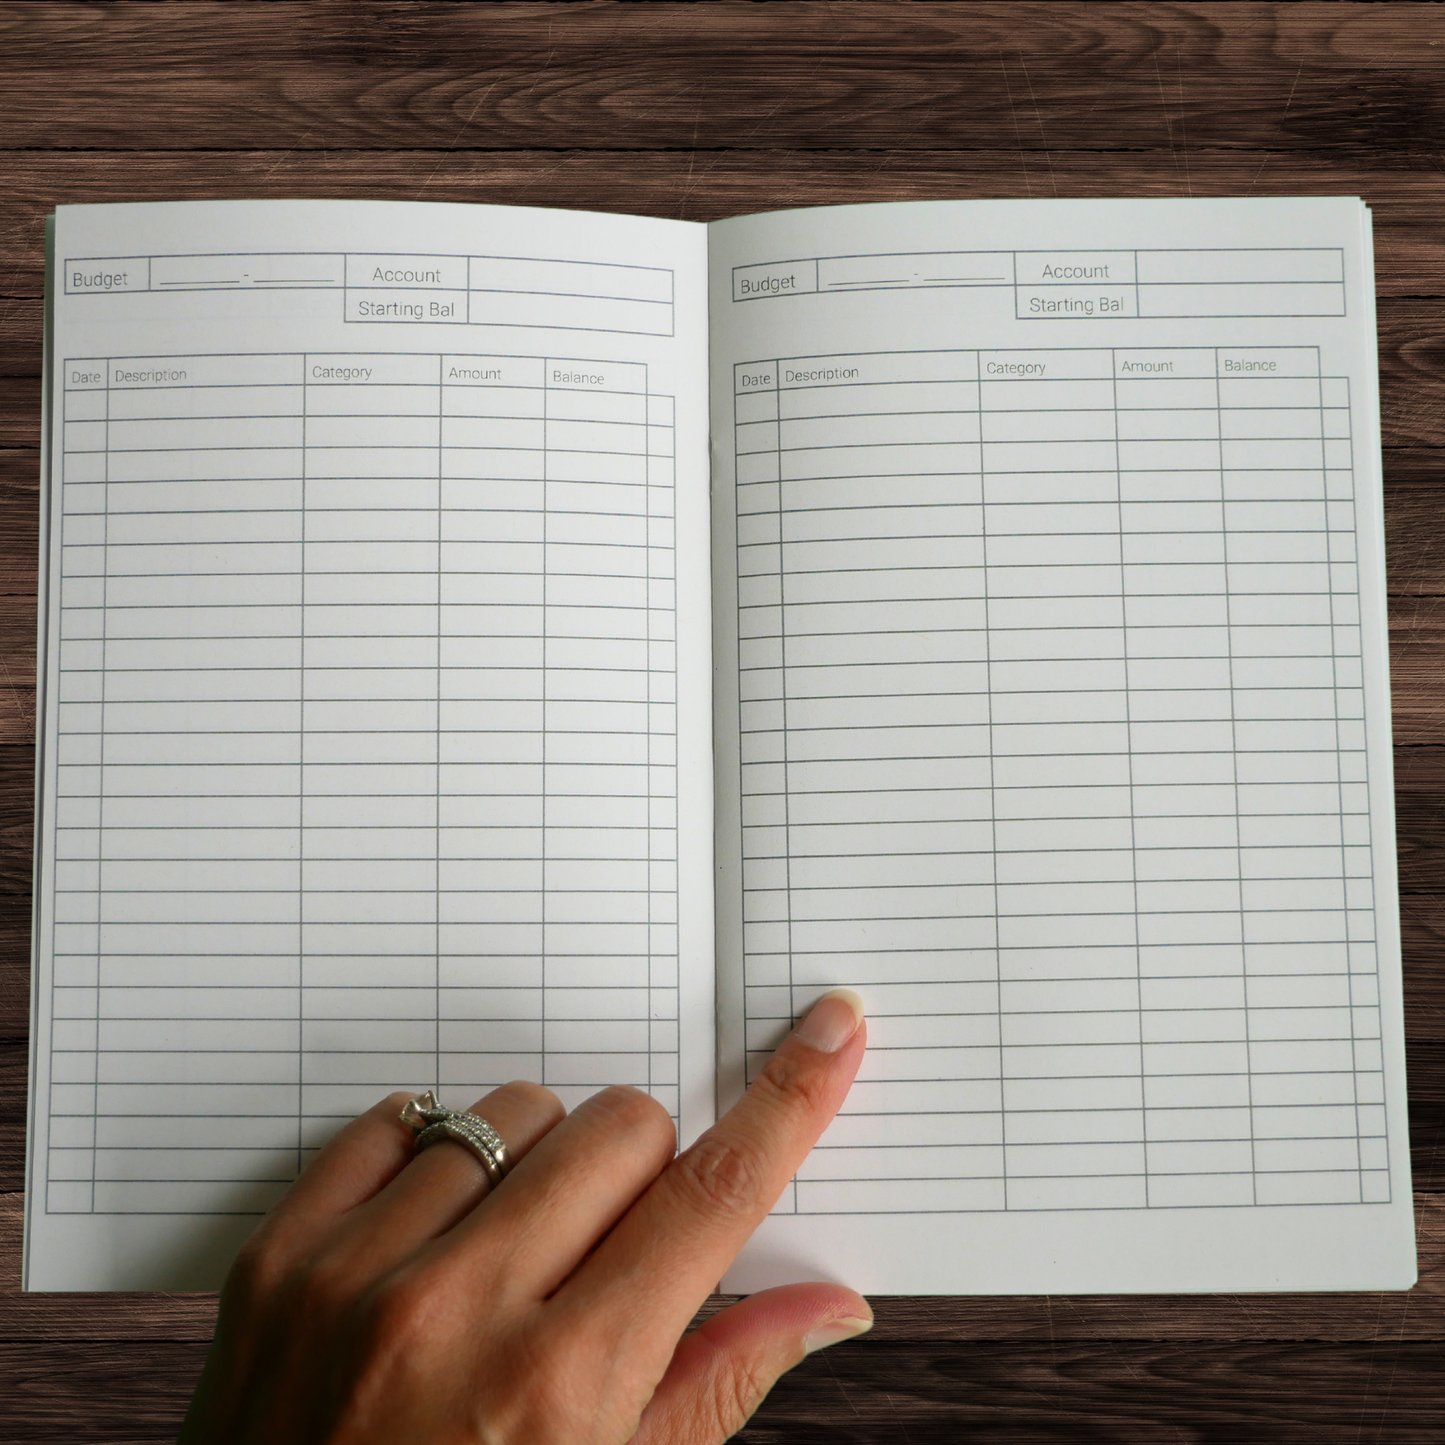 Expense Tracker Booklet - French Cafe